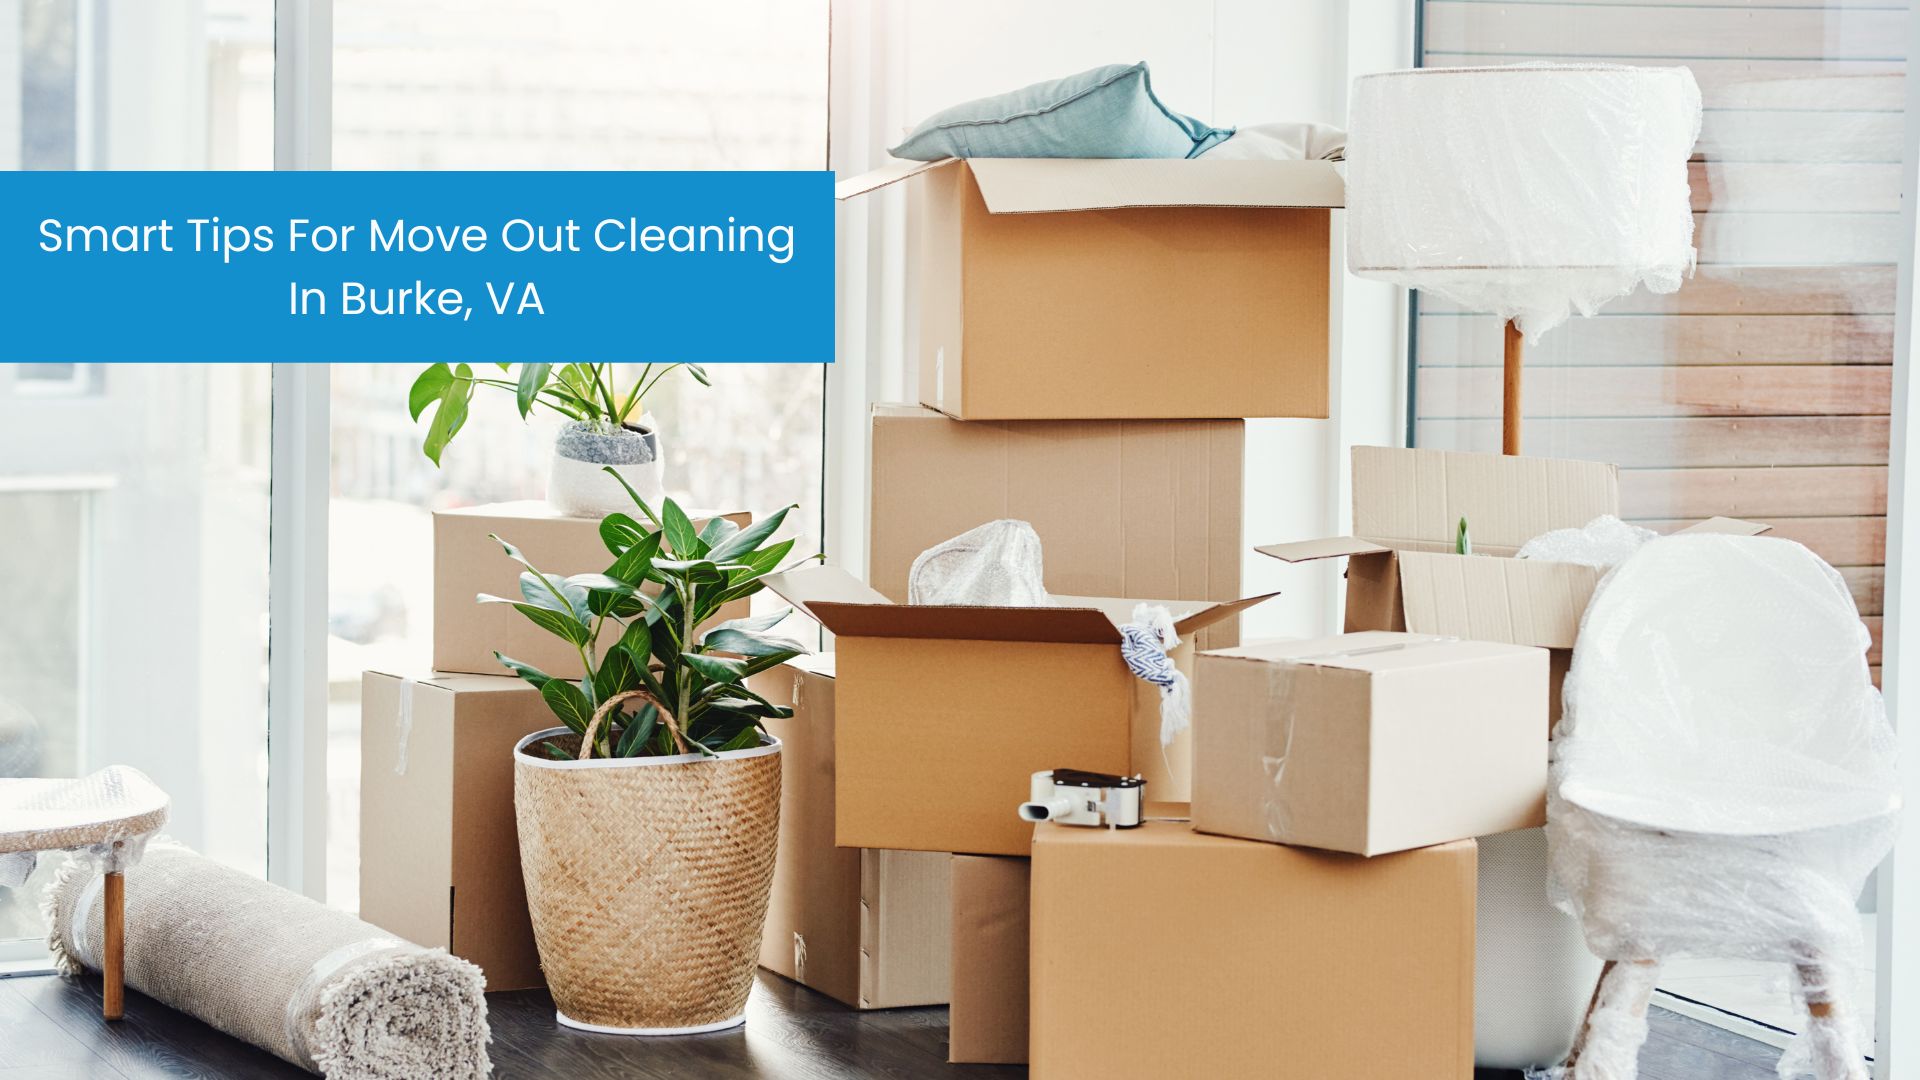 Smart Tips for Move Out Cleaning in Burke, VA